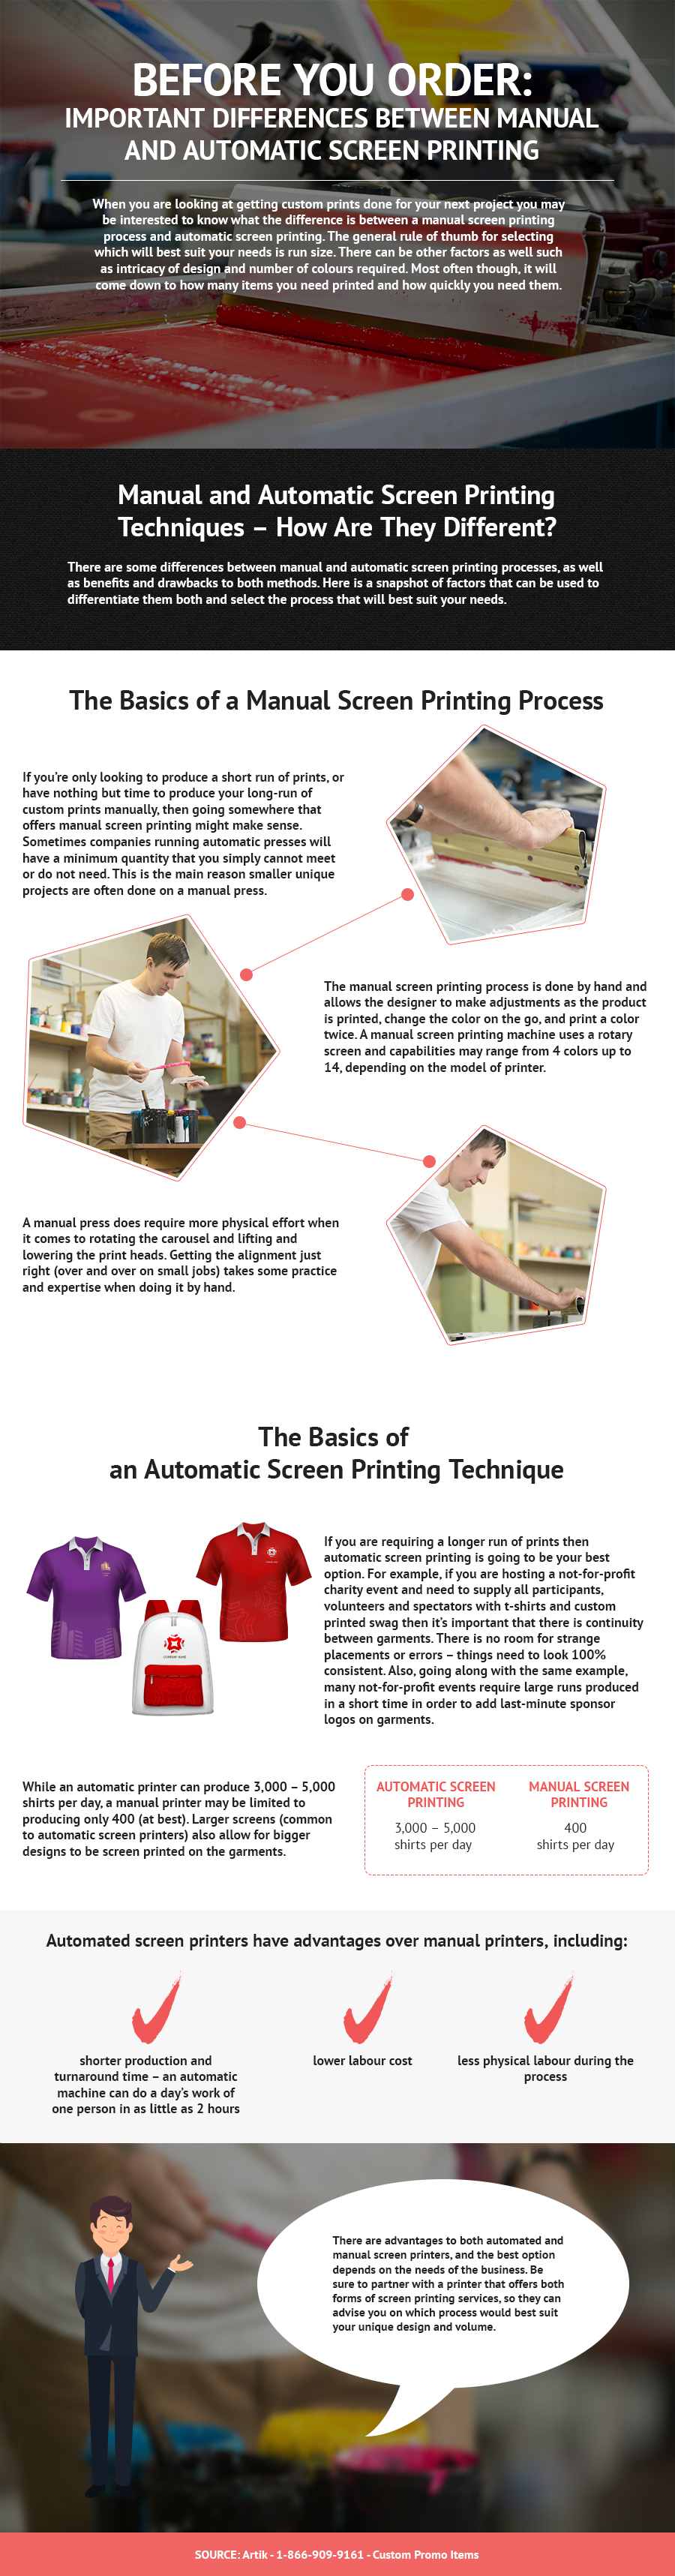 before-you-order-important-differences-between-manual-and-automatic-screen-printing-1-.jpg?width=750